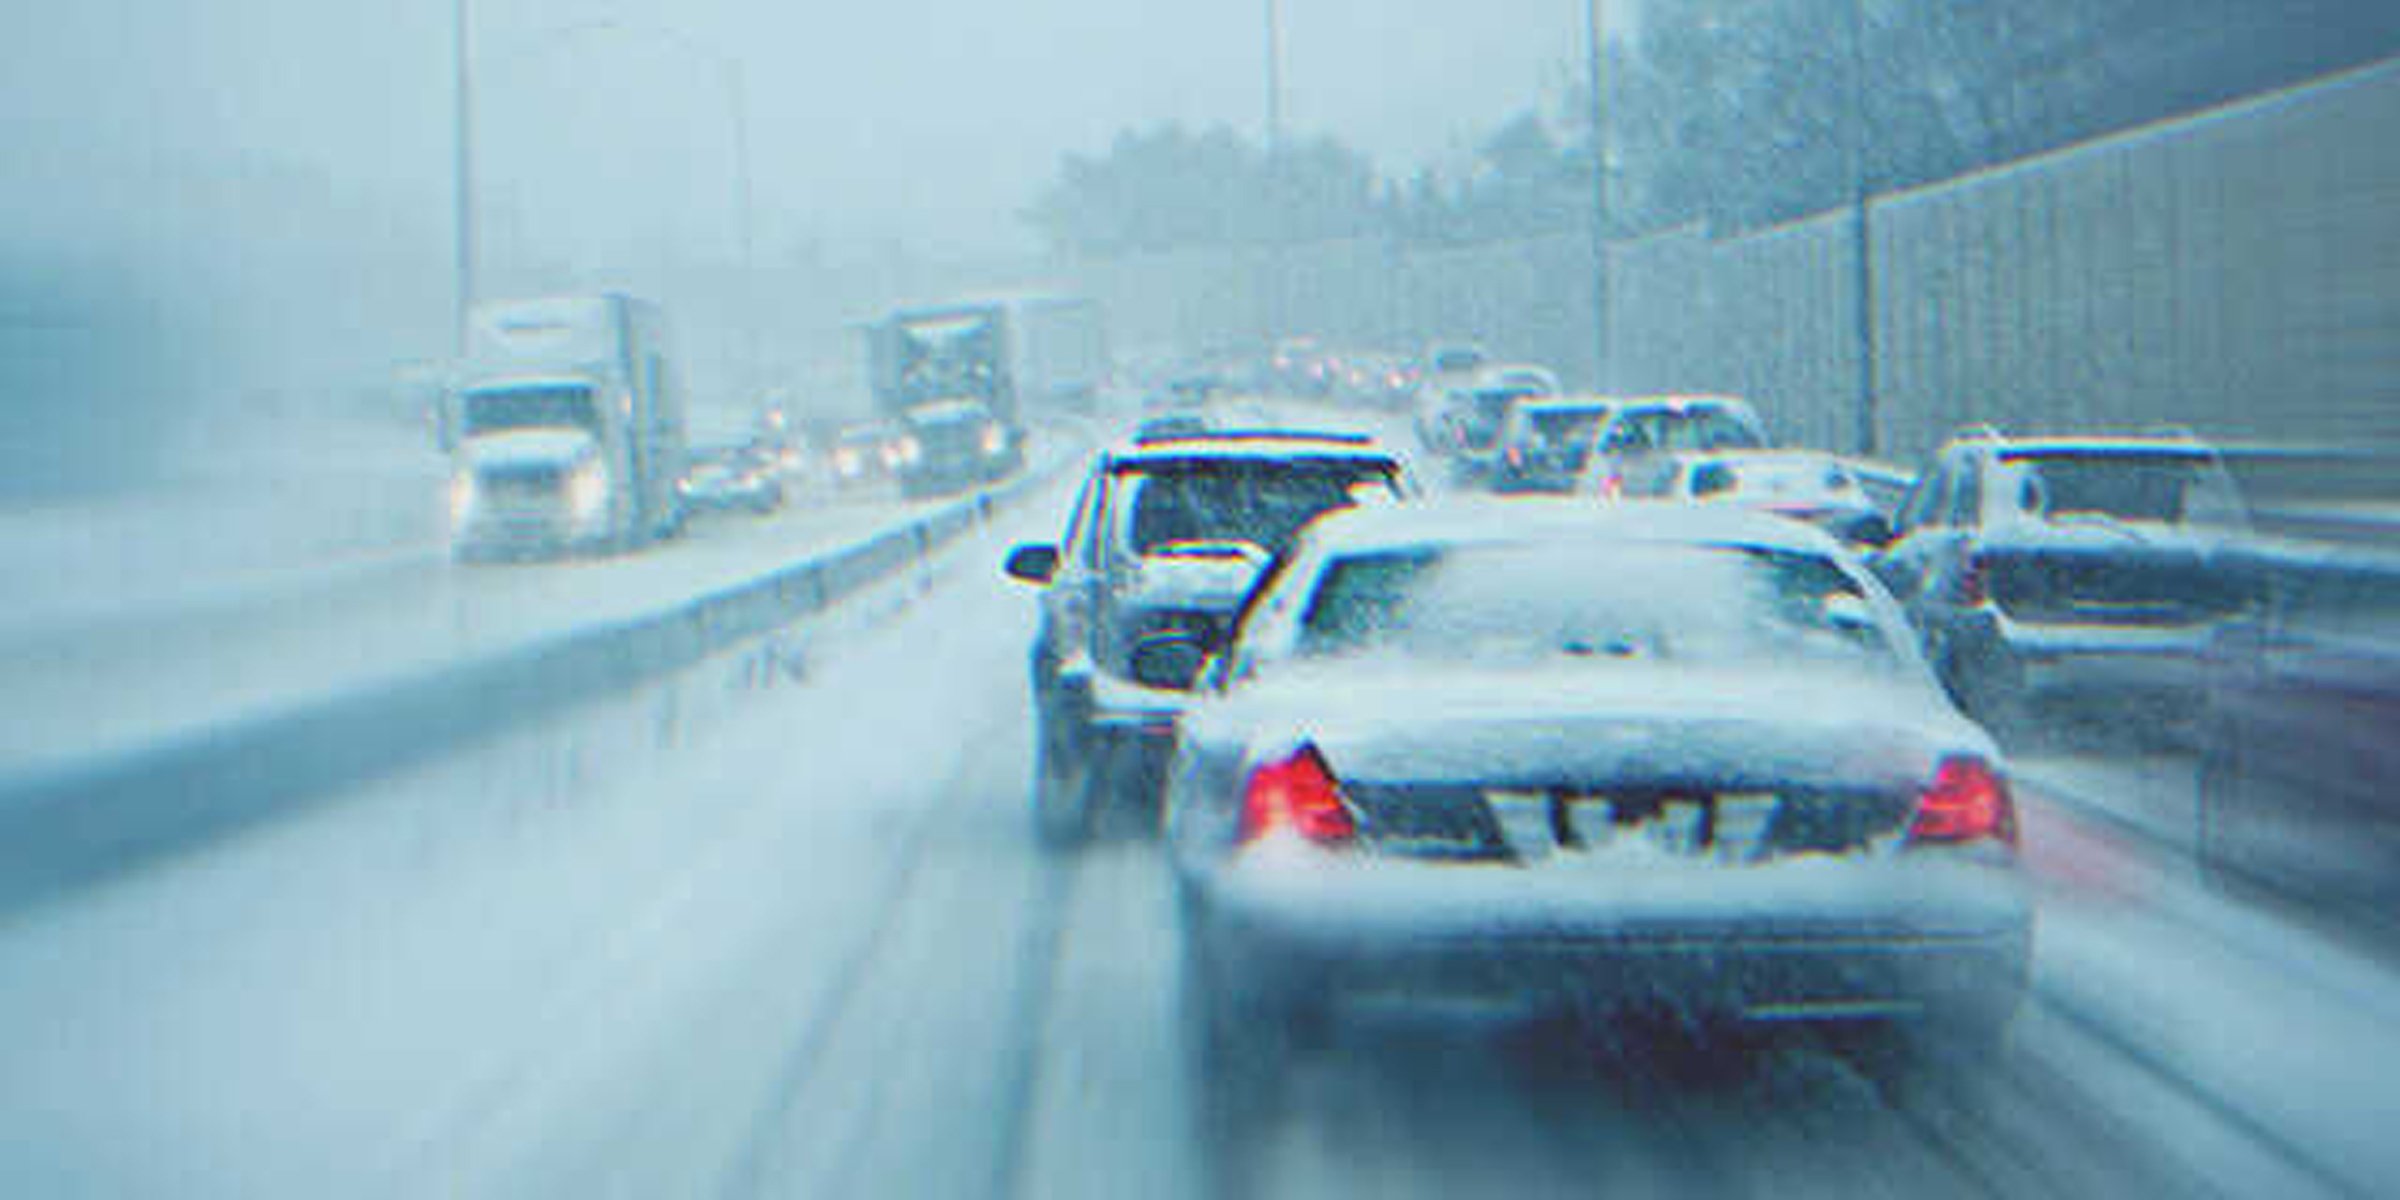 Cars on a highway during a snowstorm. | Source: Shutterstock